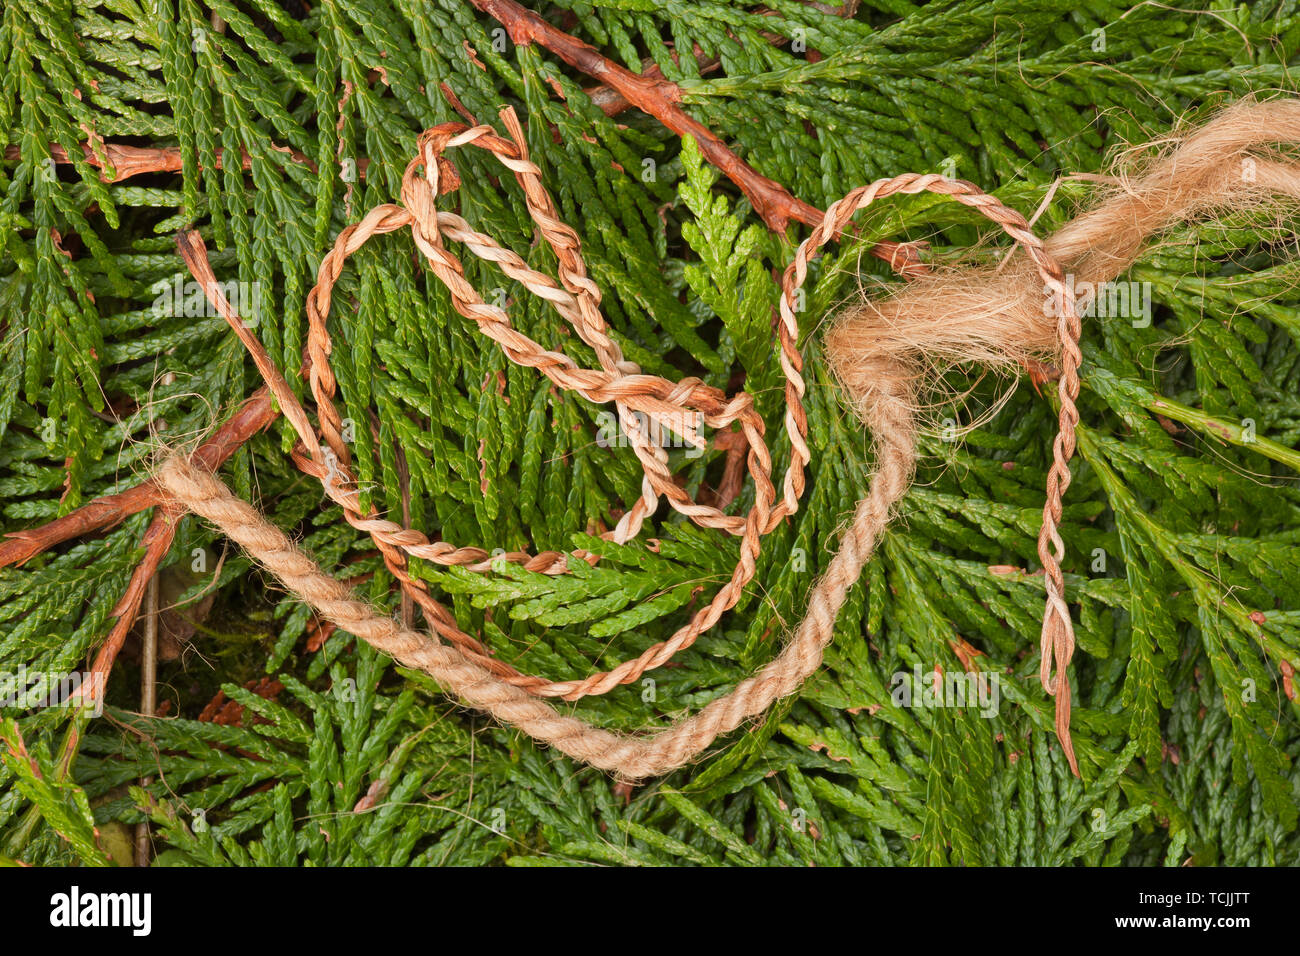 Handmade twine / cordage from the inner bark of a Western Red Cedar tree, lying on Western Red Cedar branches Stock Photo